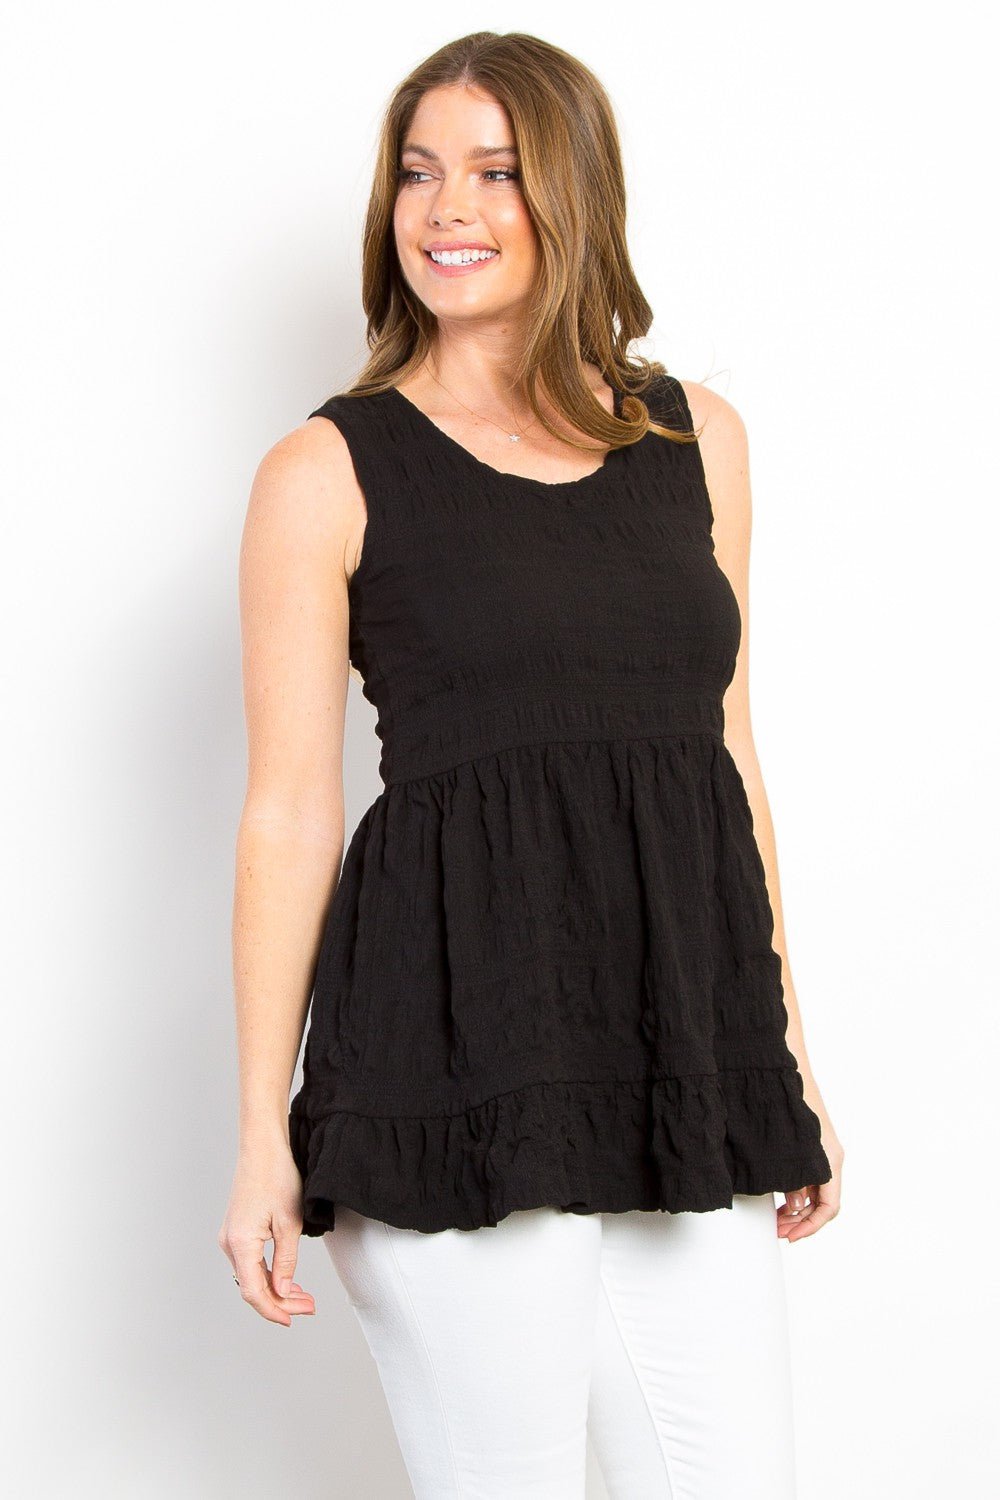 Ruffled Sleeveless Babydoll Top in BlackTopBe Stage